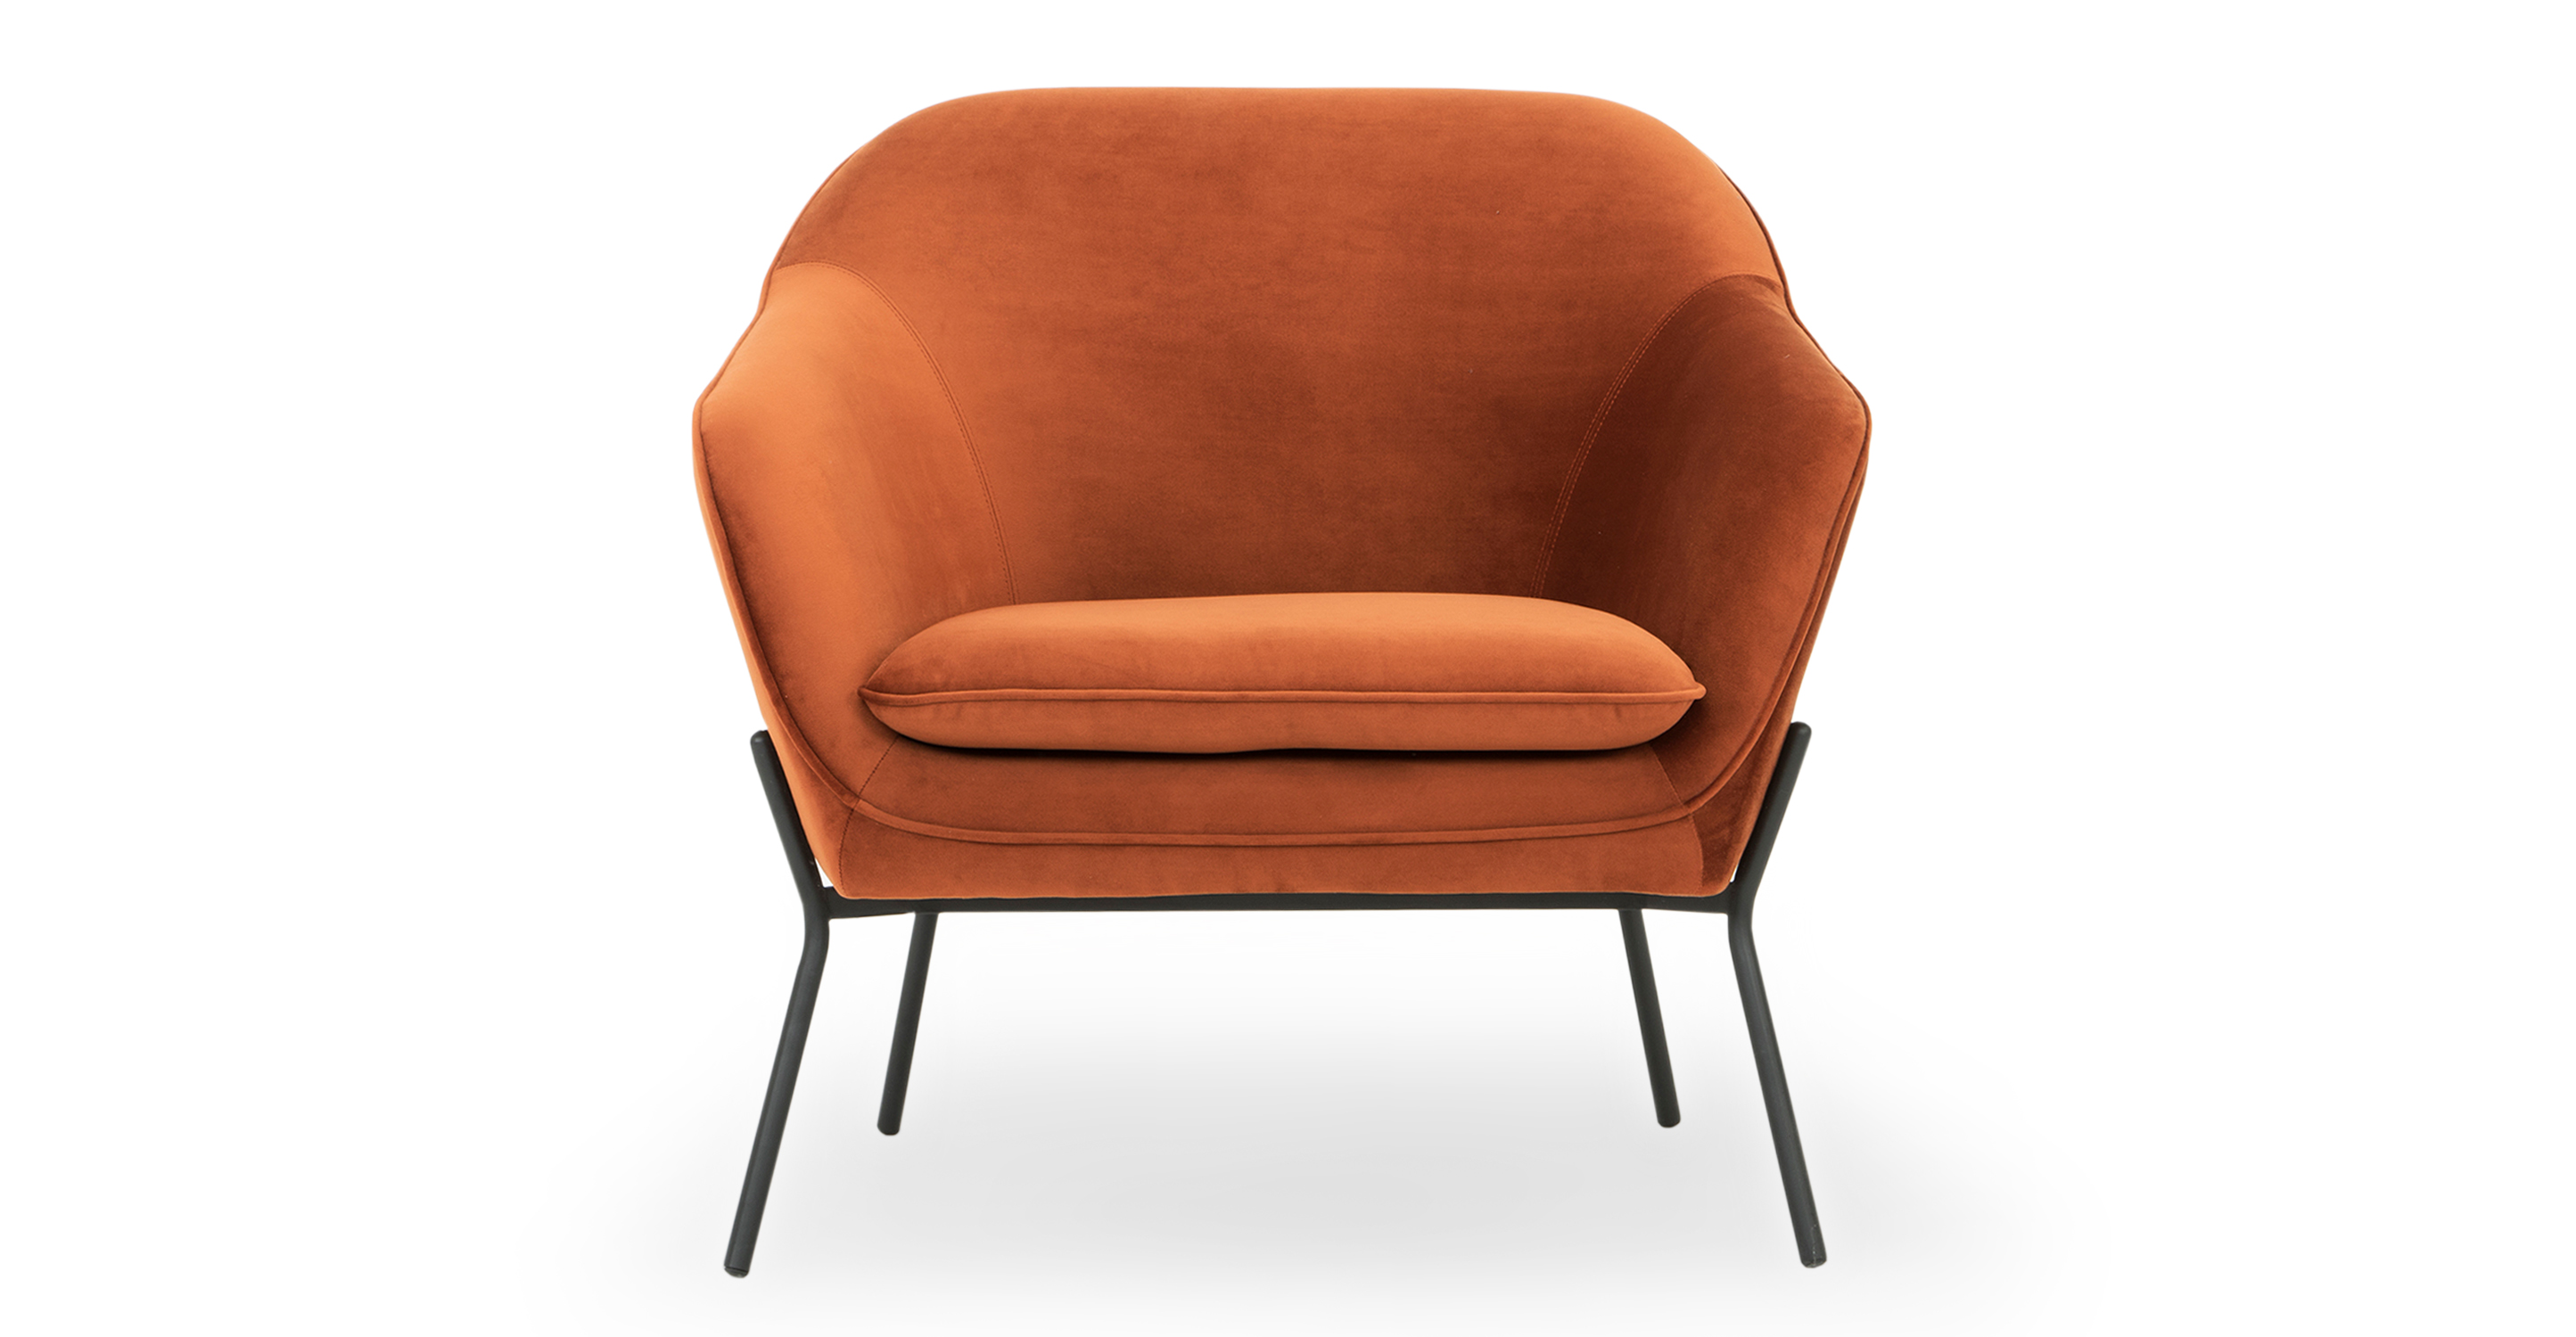 Rust Margot chair has a slightly rounded back that gently slopes into arms on both sides. Piping goes along the edge where the interior of the chair meets the sides and back. The seat cushion is removable. The four black metal frame is exposed and extends up the sides of the chair for support and visual interest. Vibe is fun, modern, and simplistically classic design.